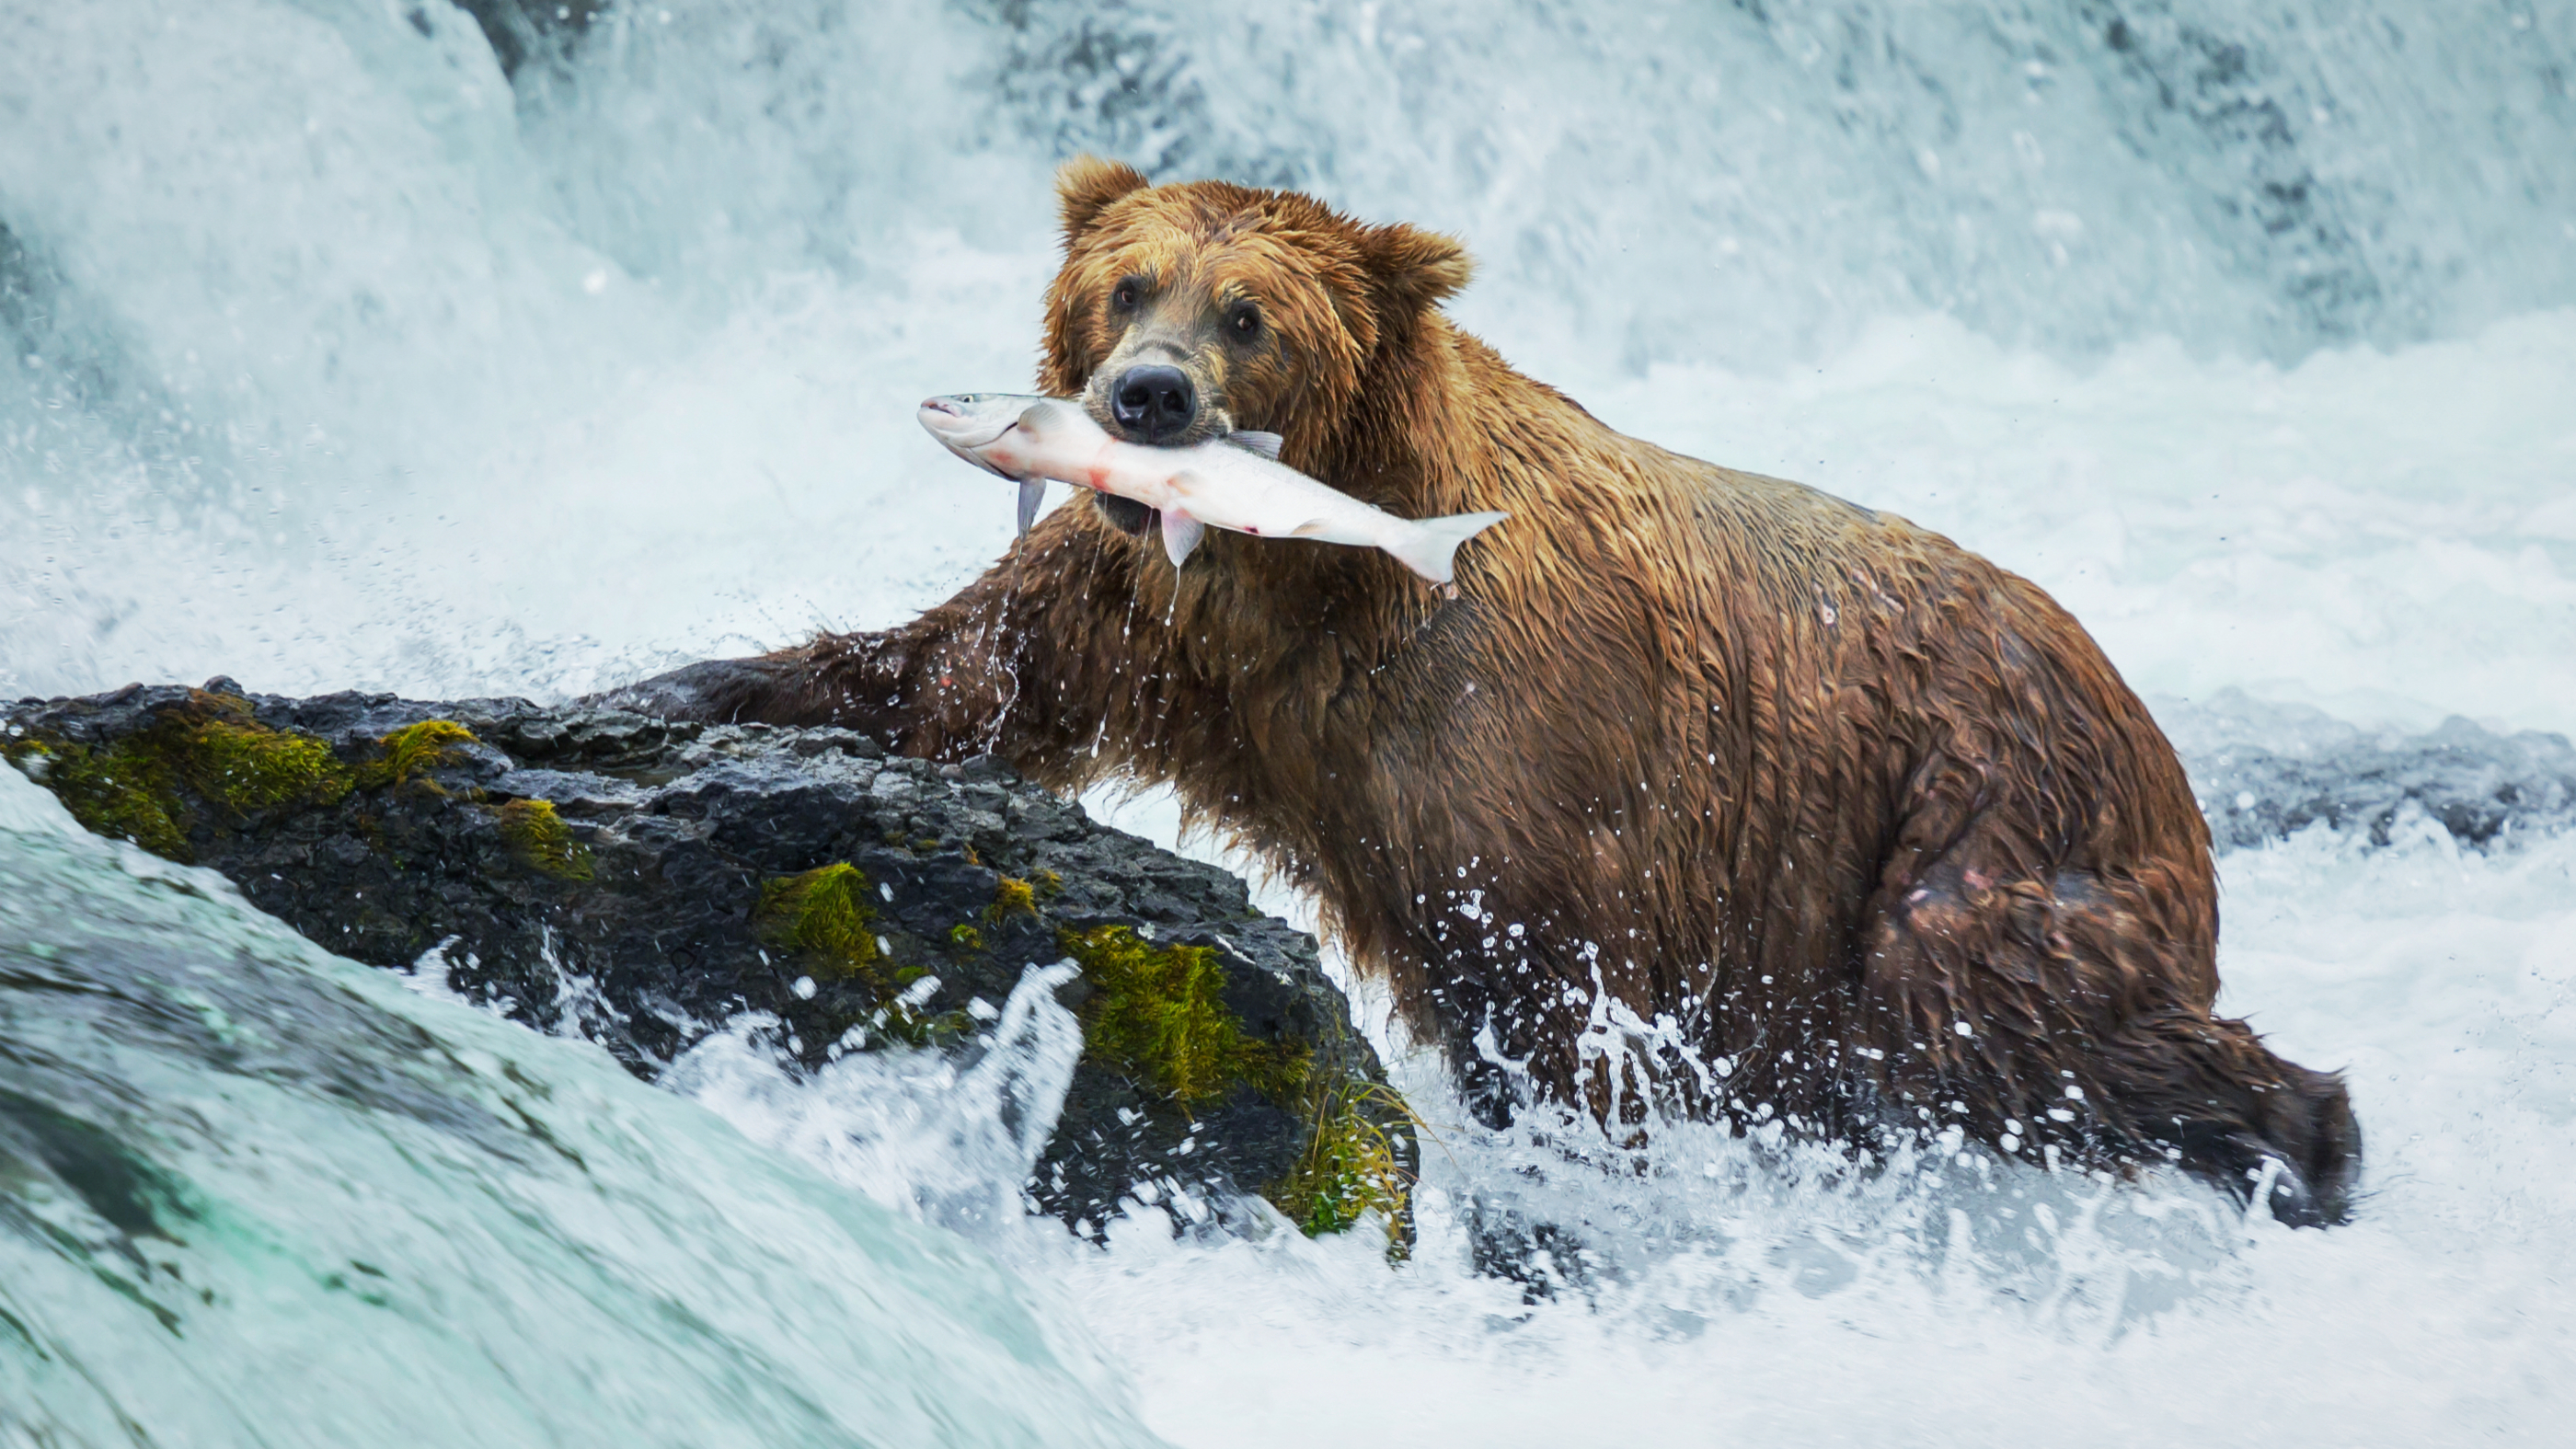 Get Your Feet Wet in a Brooks Falls Bearcam Chat!